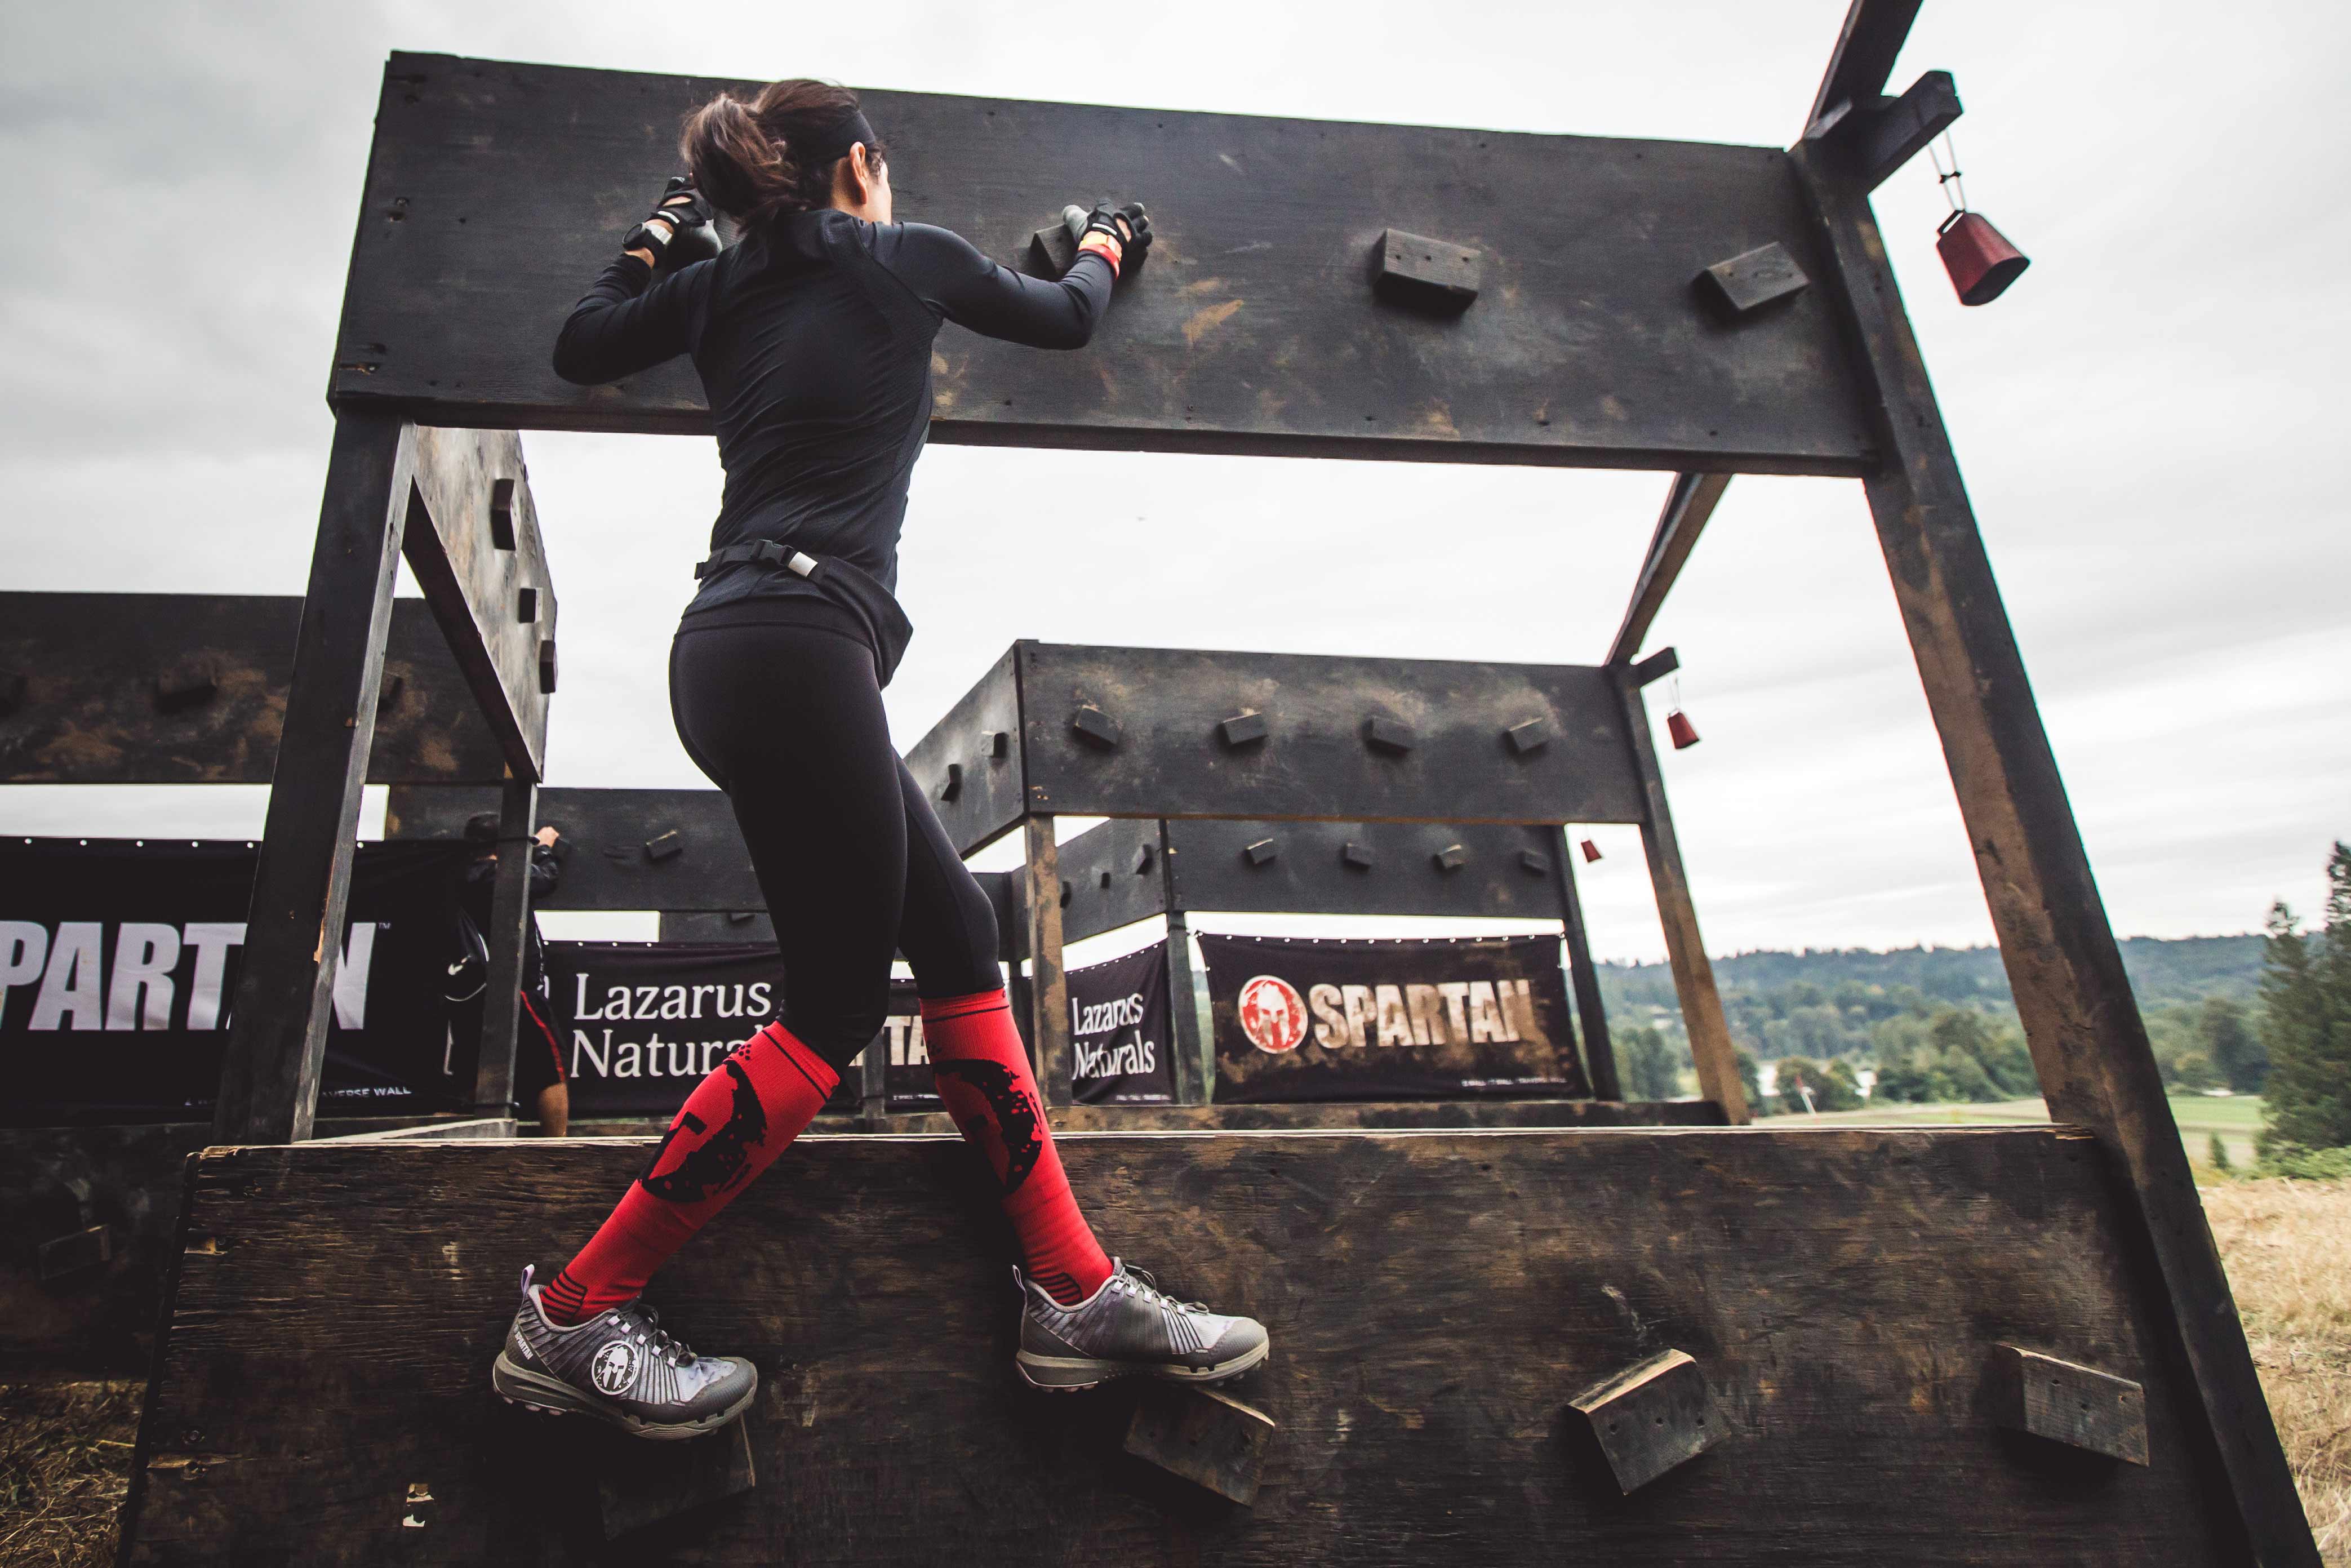 having prepared with ankle stability exercises, a Spartan racer completes an obstacle with no injuries